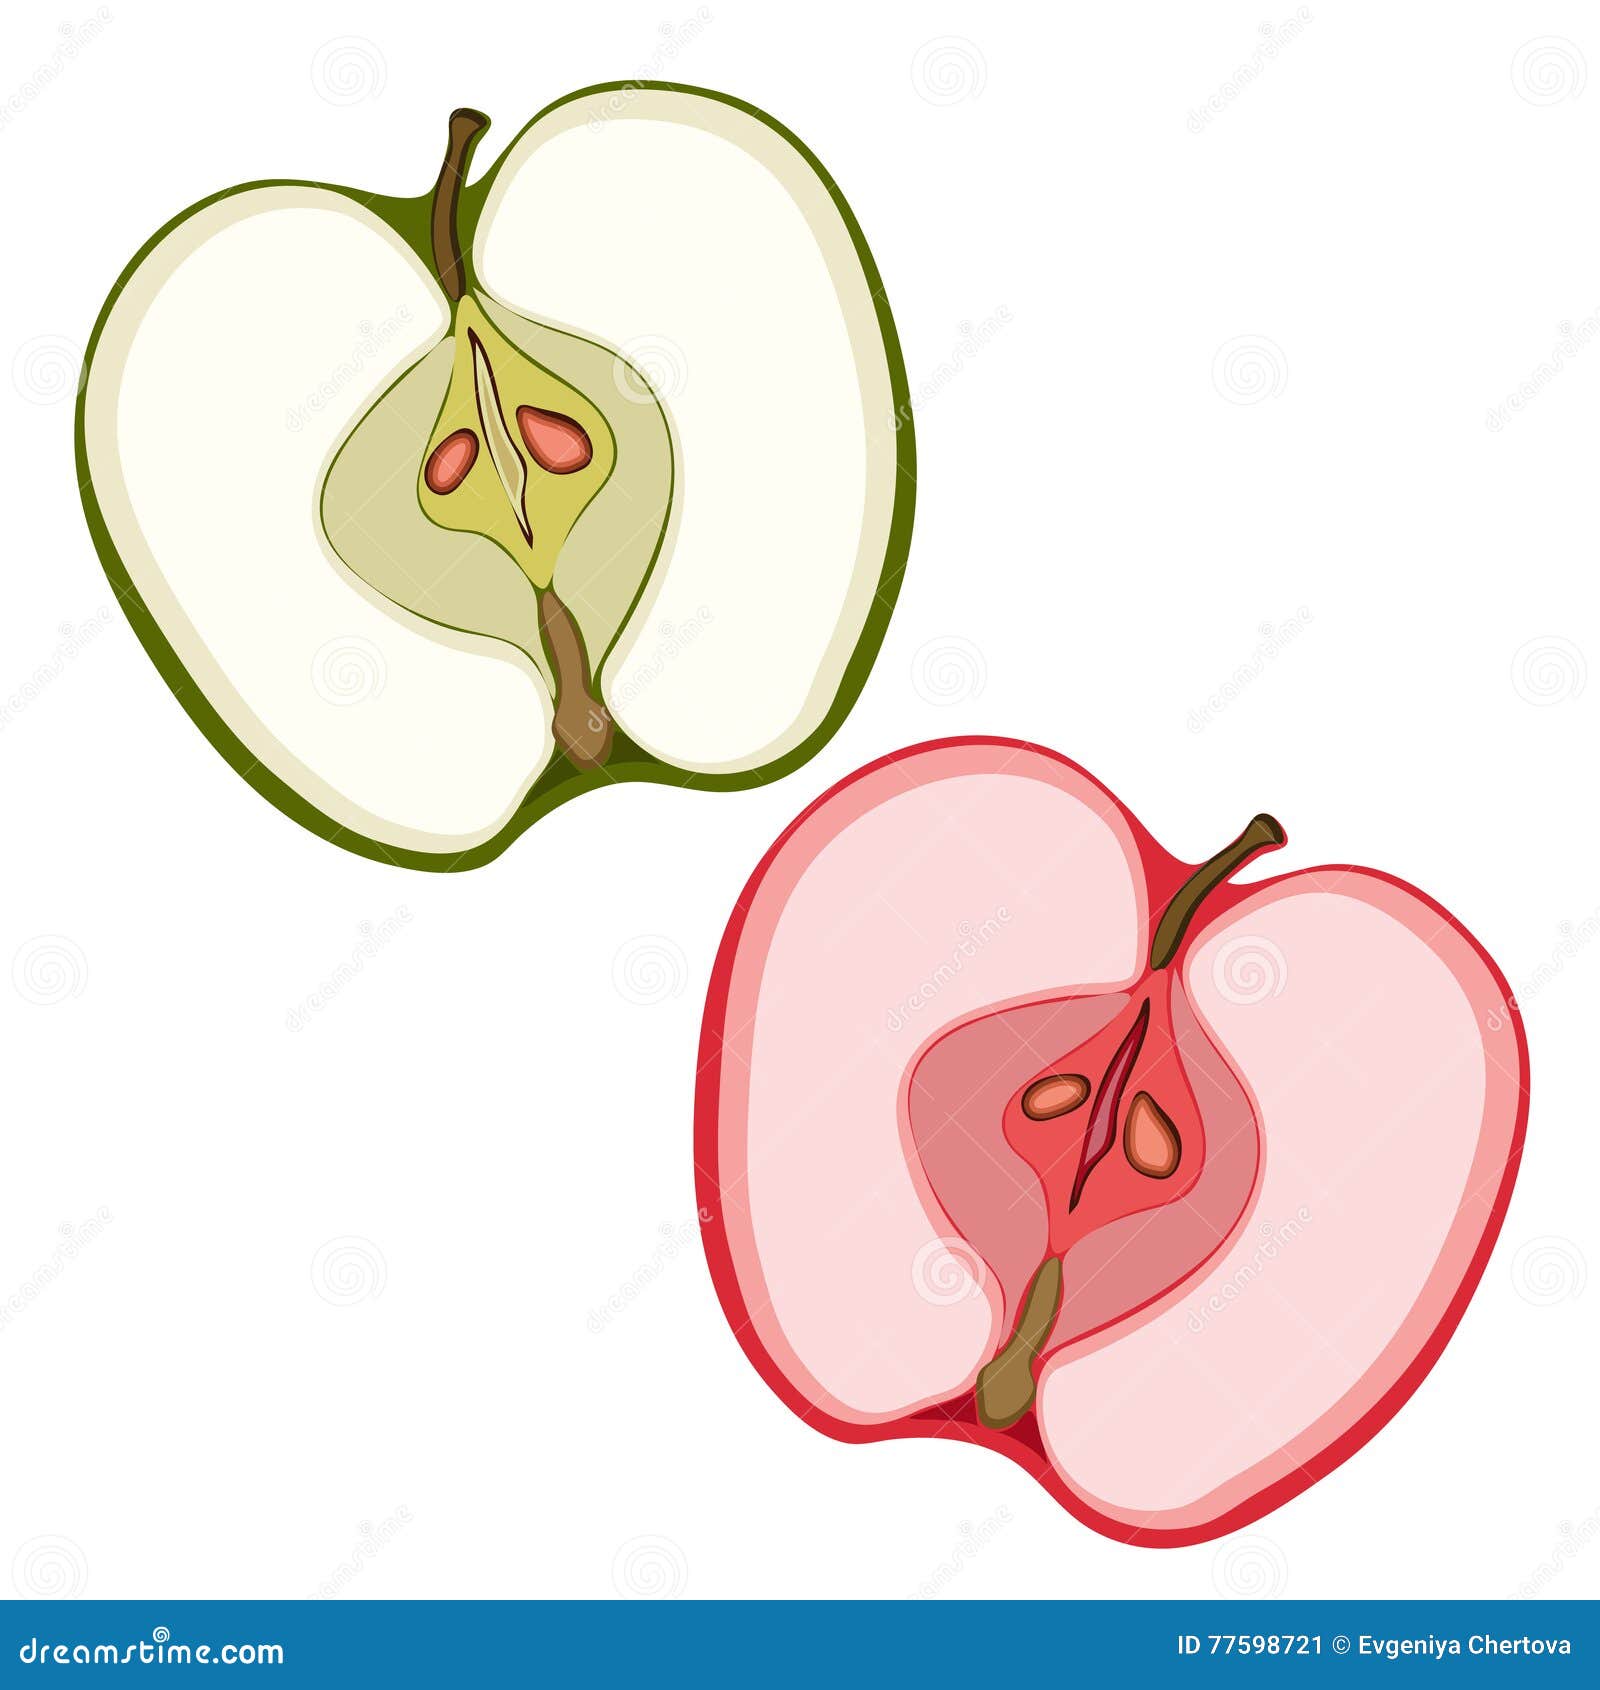 Apple sectional. Slices of green and red . Painted fruit, graphic art, cartoon. Vector illustration. Apple sectional. Slices of green and red apple. Painted fruit, graphic art, cartoon